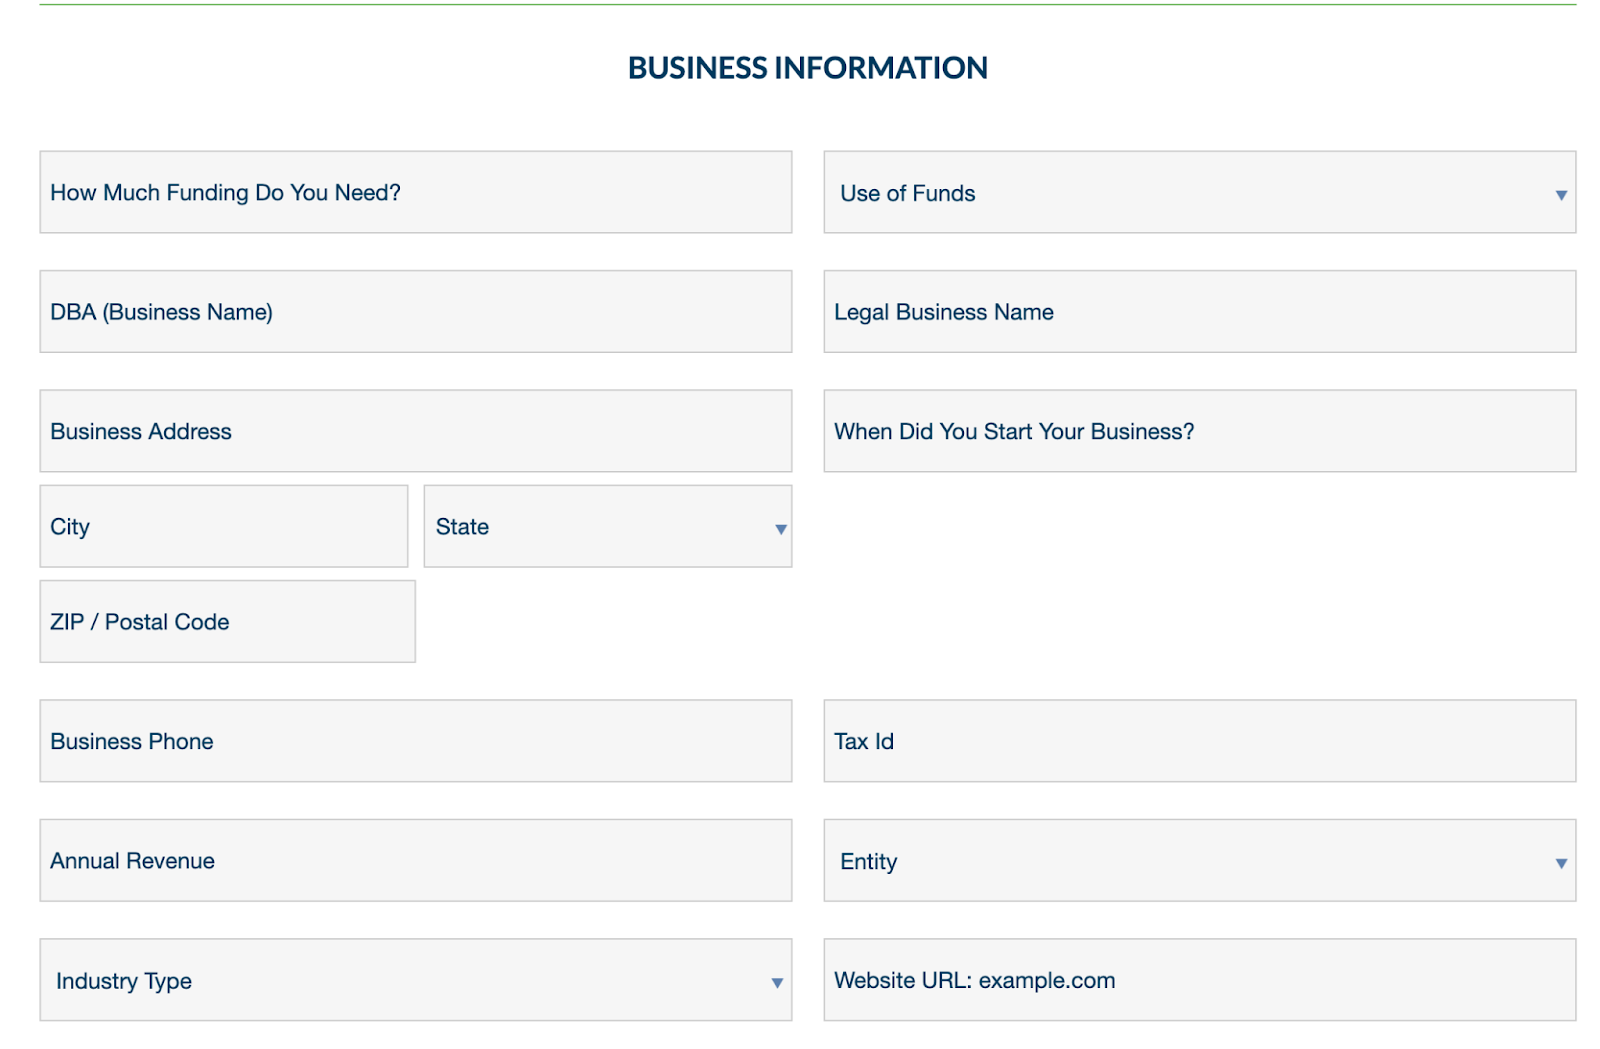 A screenshot showing the different business information Kapitus will require in an application for a small business loan